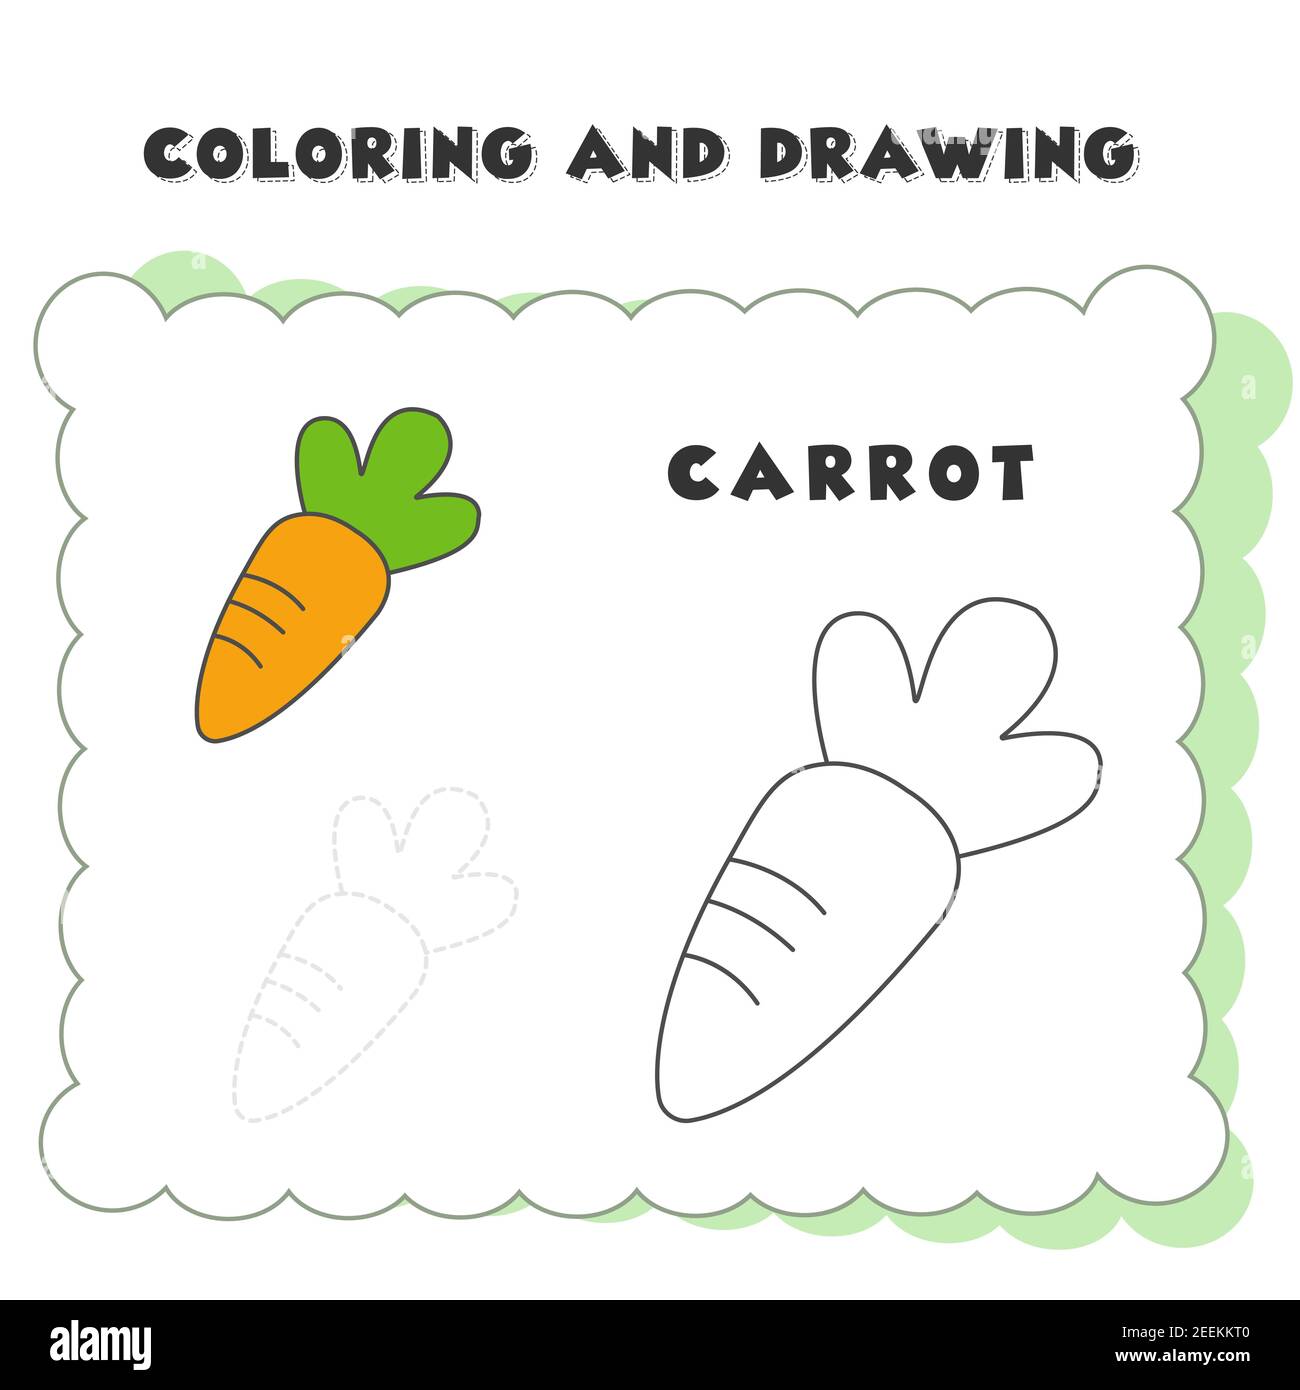 coloring and drawing book element carrot hand drawn vegetables illustration for educational coloring book design vector outline cartoon stock vector image art alamy